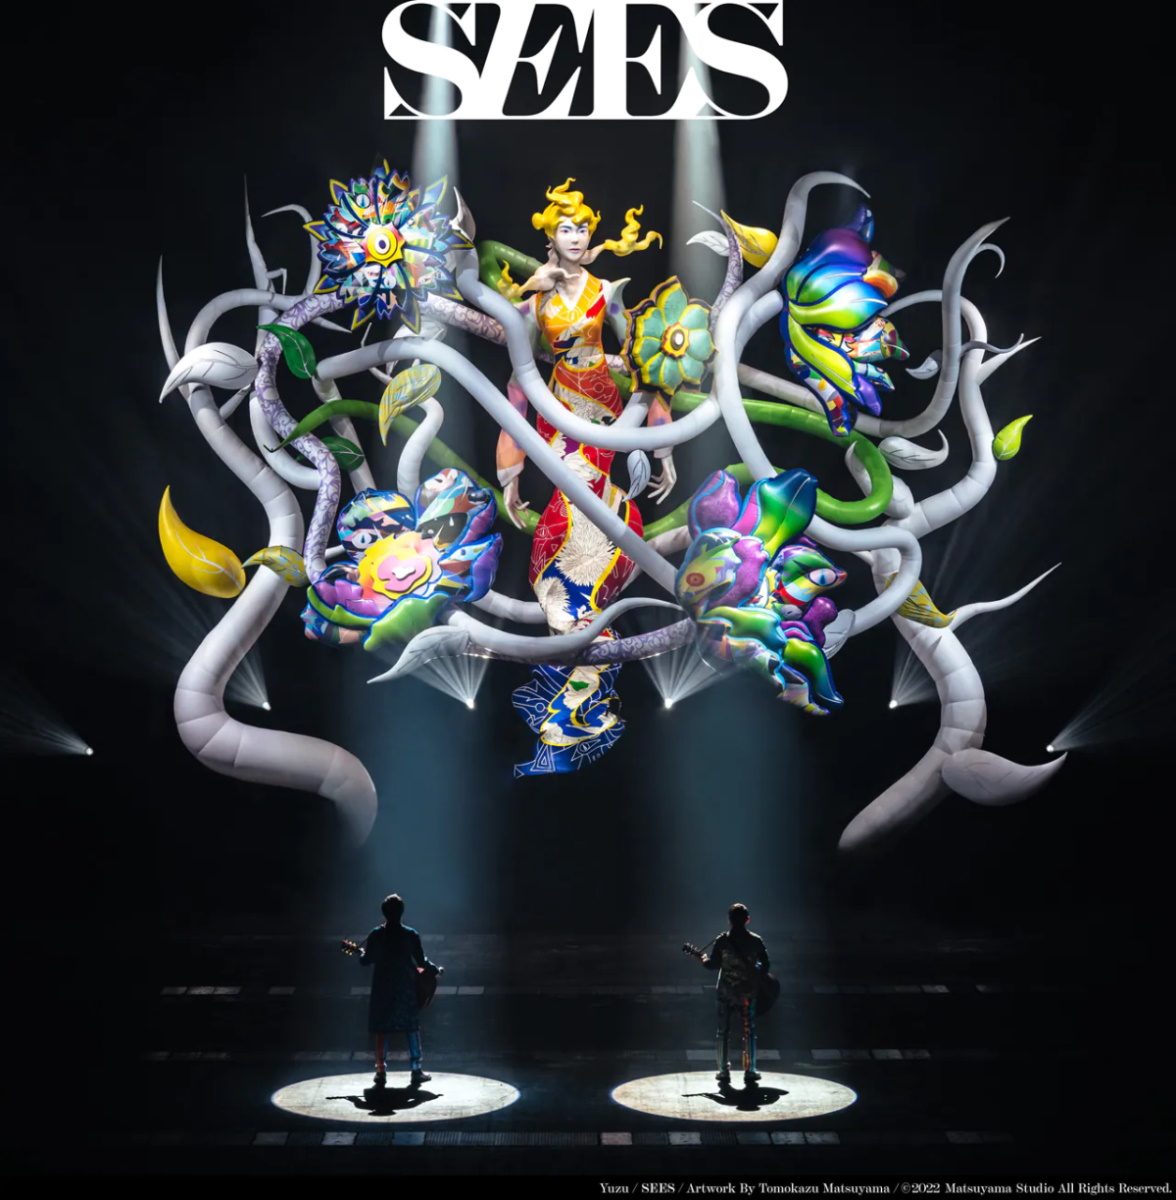 Cover for『YUZU - Kimi wo Omou』from the release『SEES』